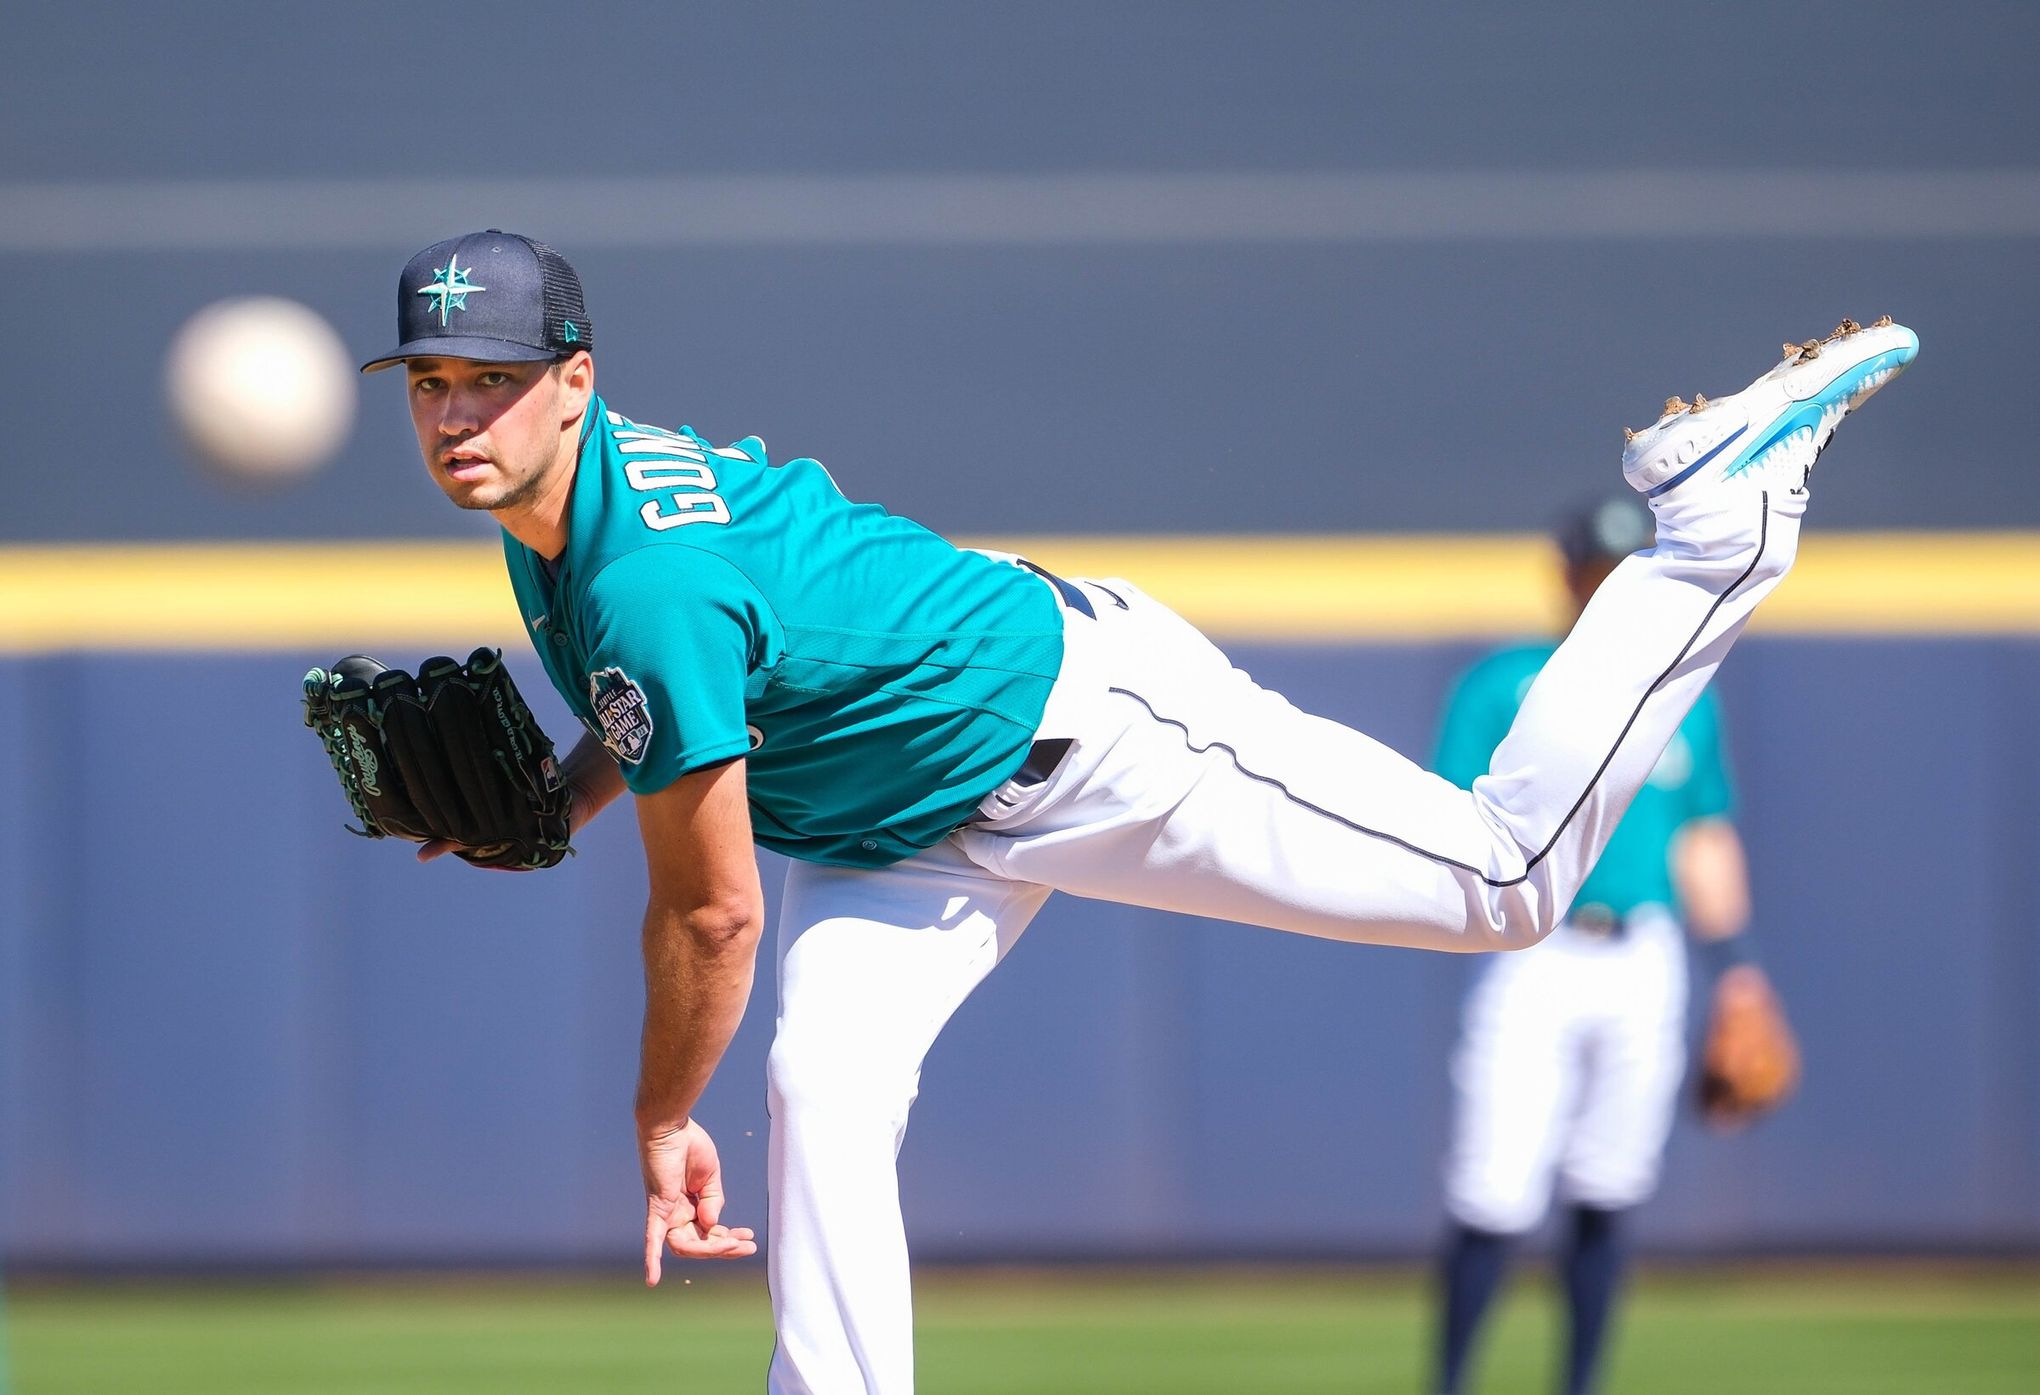 Marco Gonzales talks big season with Seattle Mariners, favorite MLB parks  and returning to Coors Field